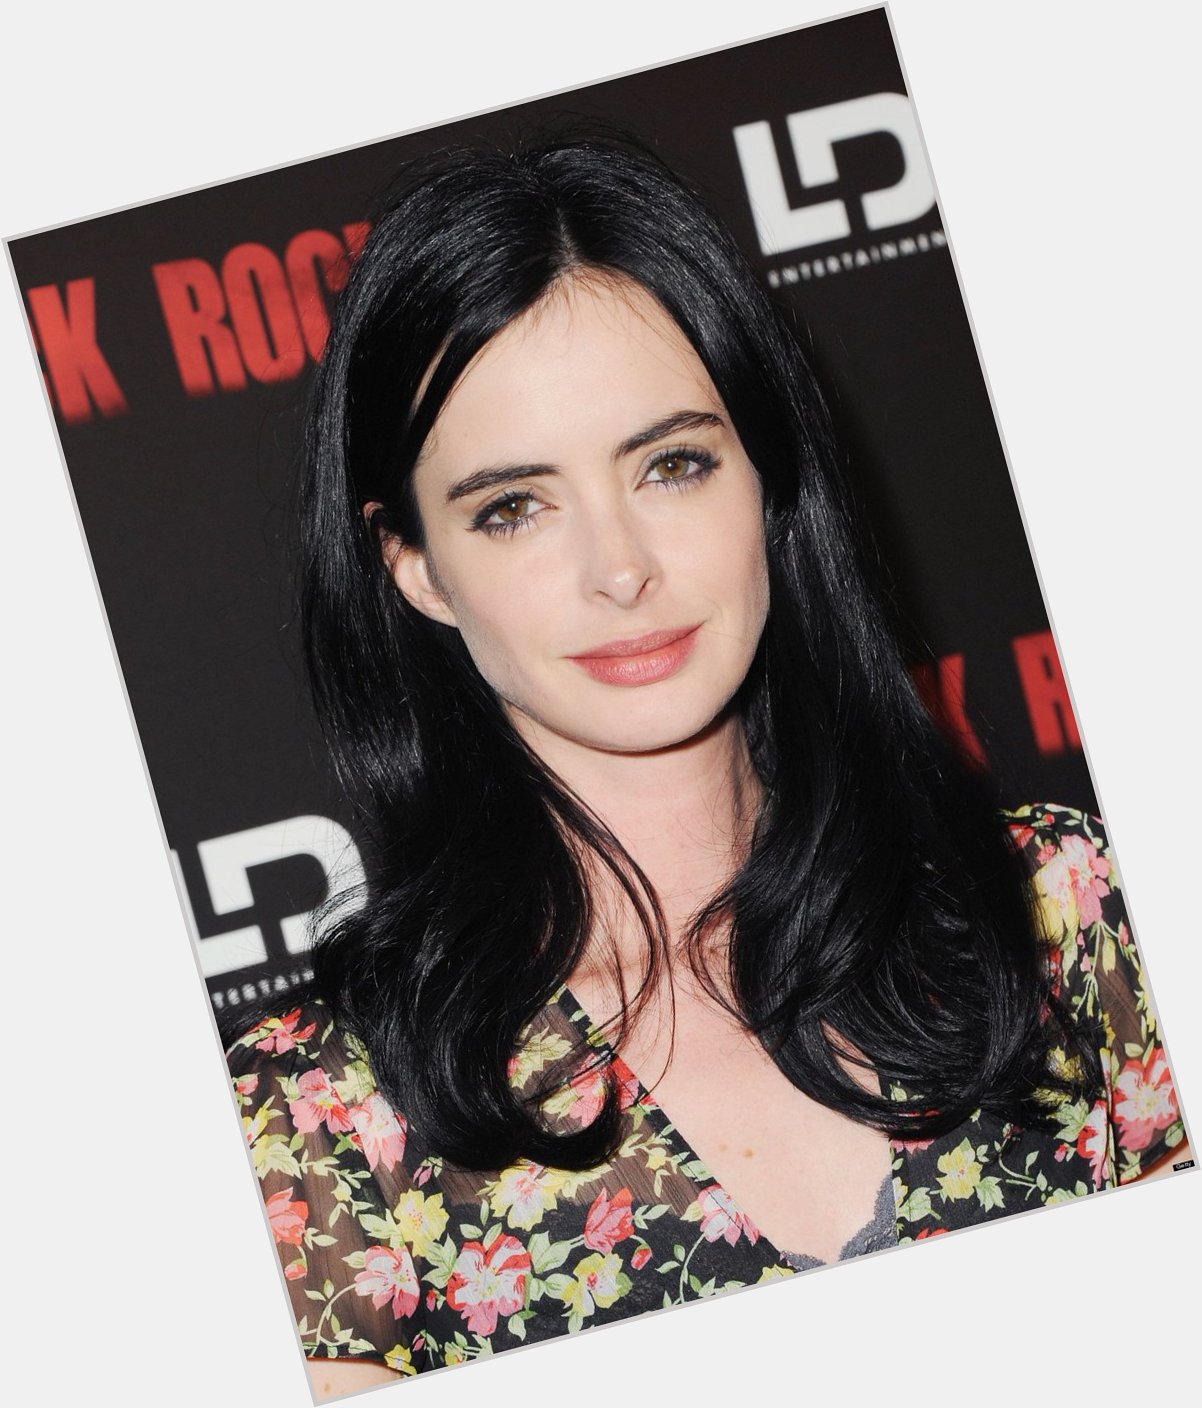 Happy birthday to the lovely, wonderful and insanely good actress and human, Krysten Ritter! Have an incredible day! 